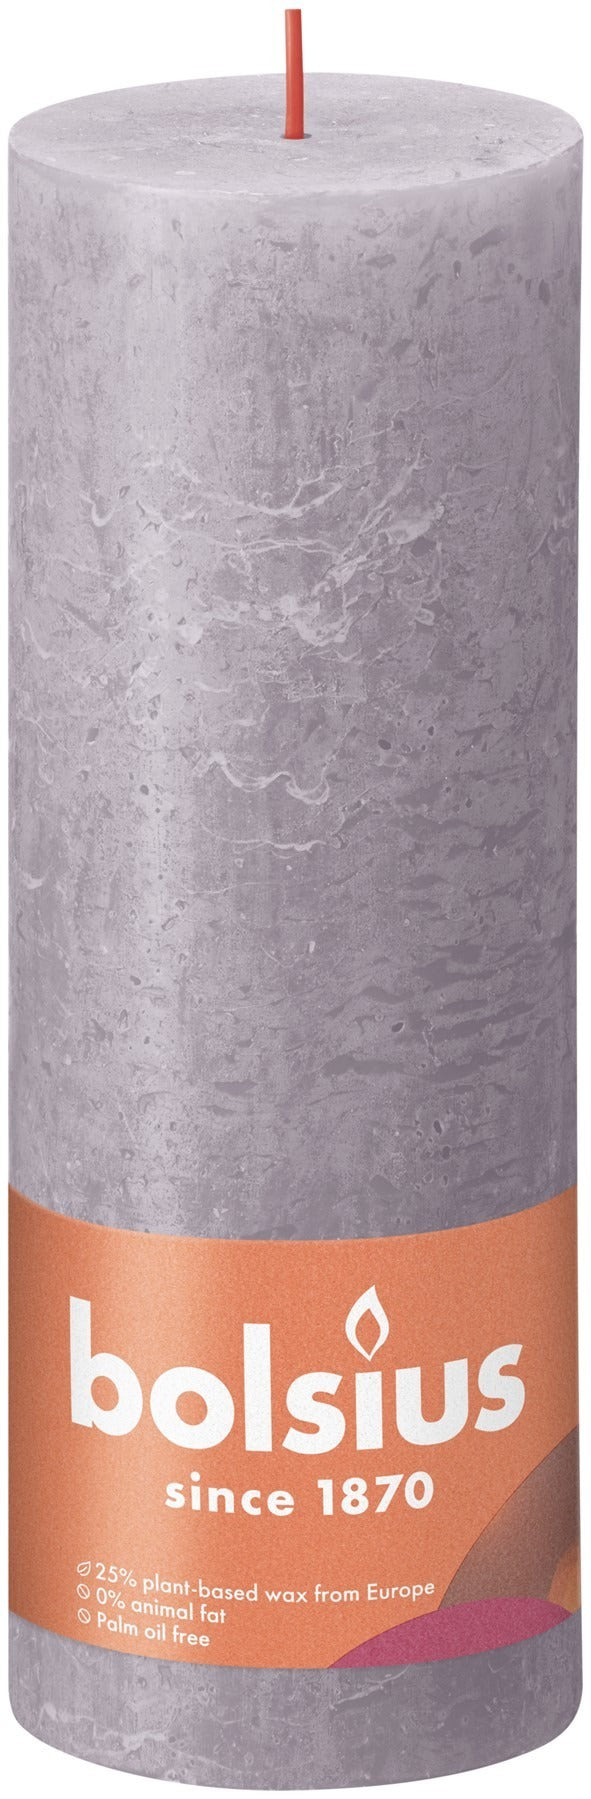 View Bolsius Rustic Shine Frosted Lavender Pillar Candle 190mm x 68mm information